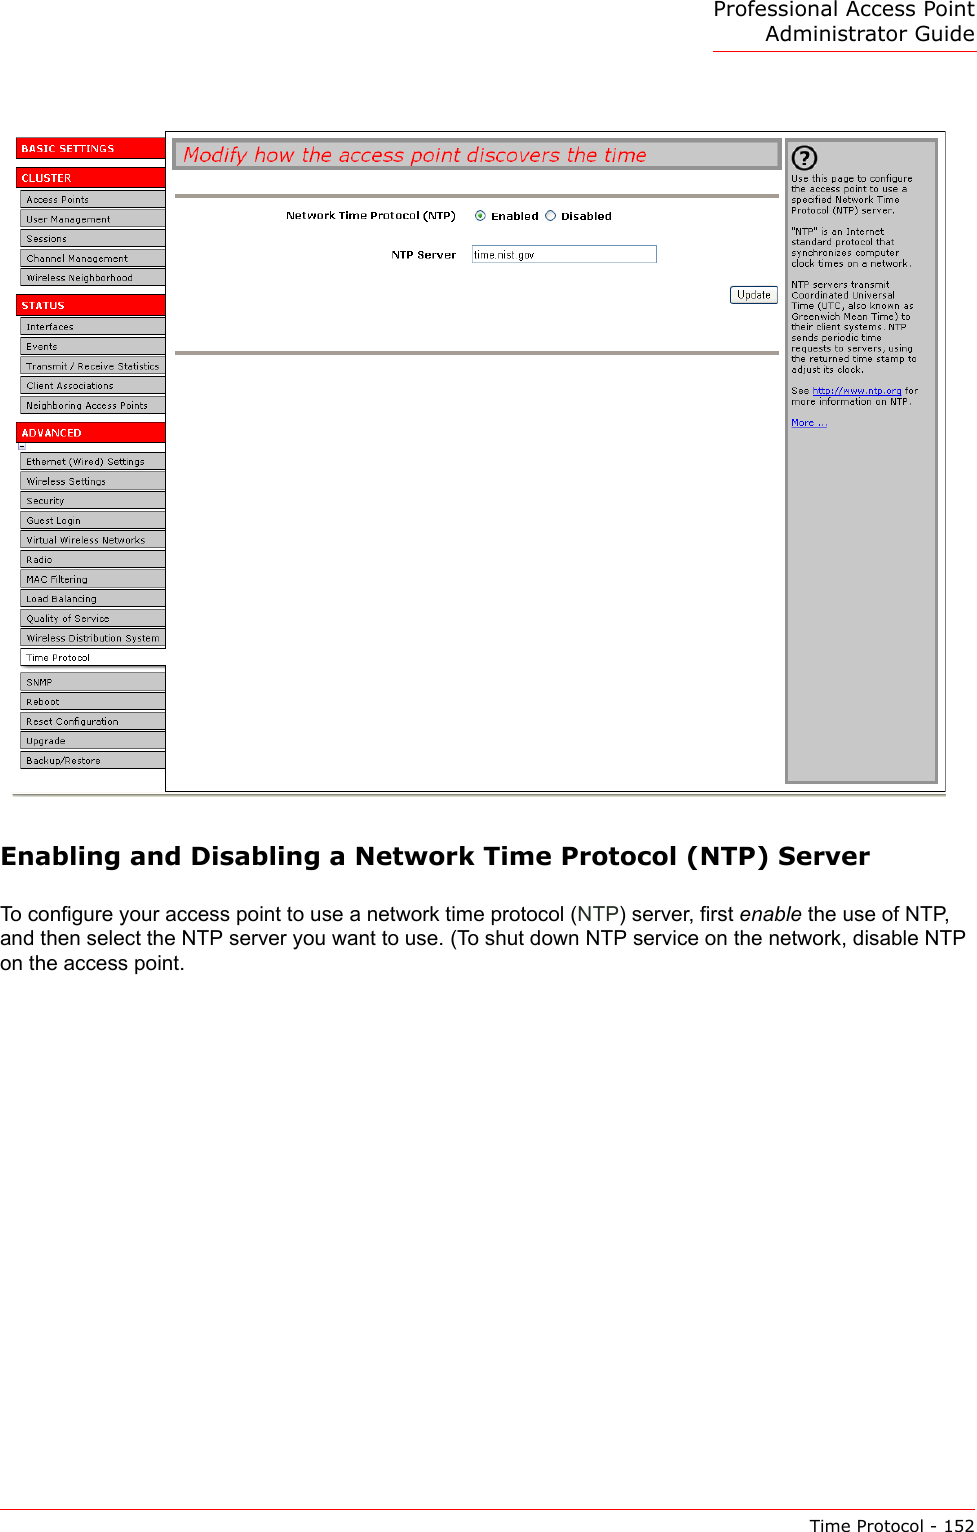 Professional Access Point Administrator GuideTime Protocol - 152Enabling and Disabling a Network Time Protocol (NTP) ServerTo configure your access point to use a network time protocol (NTP) server, first enable the use of NTP, and then select the NTP server you want to use. (To shut down NTP service on the network, disable NTP on the access point.